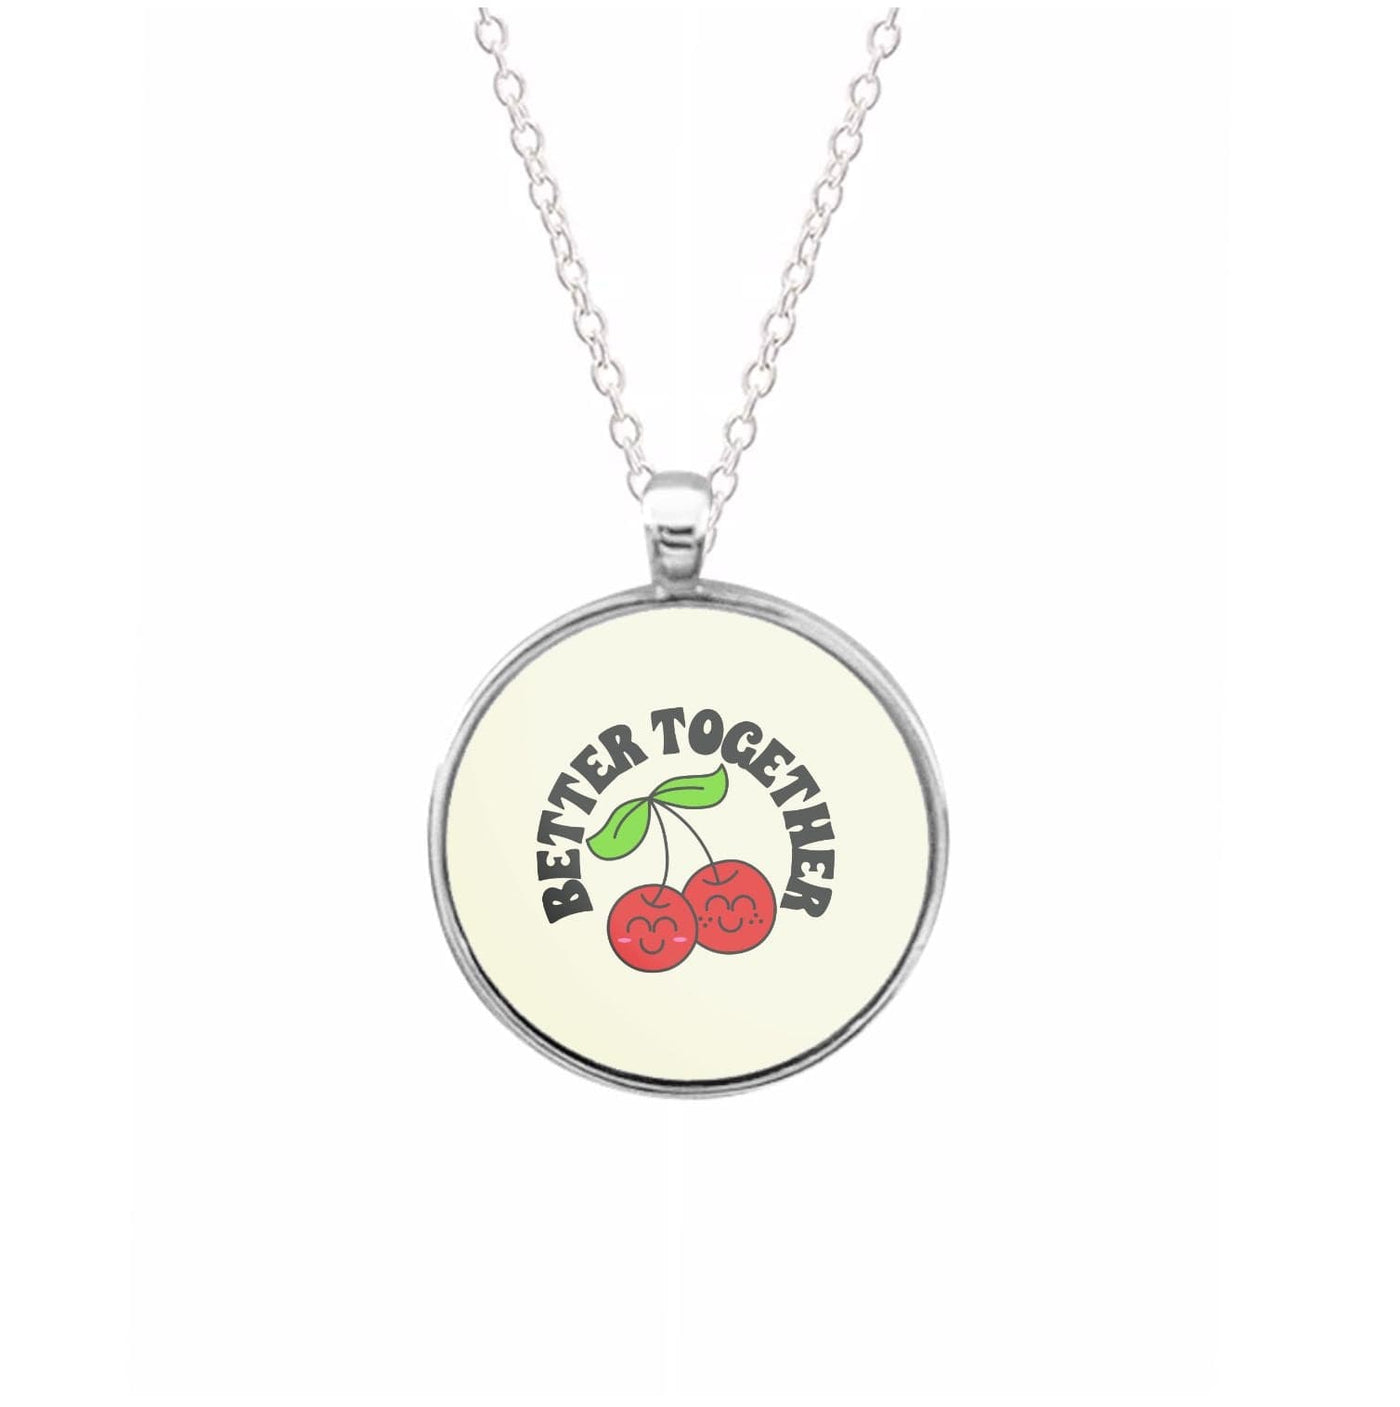 Better Together - Valentine's Day Necklace